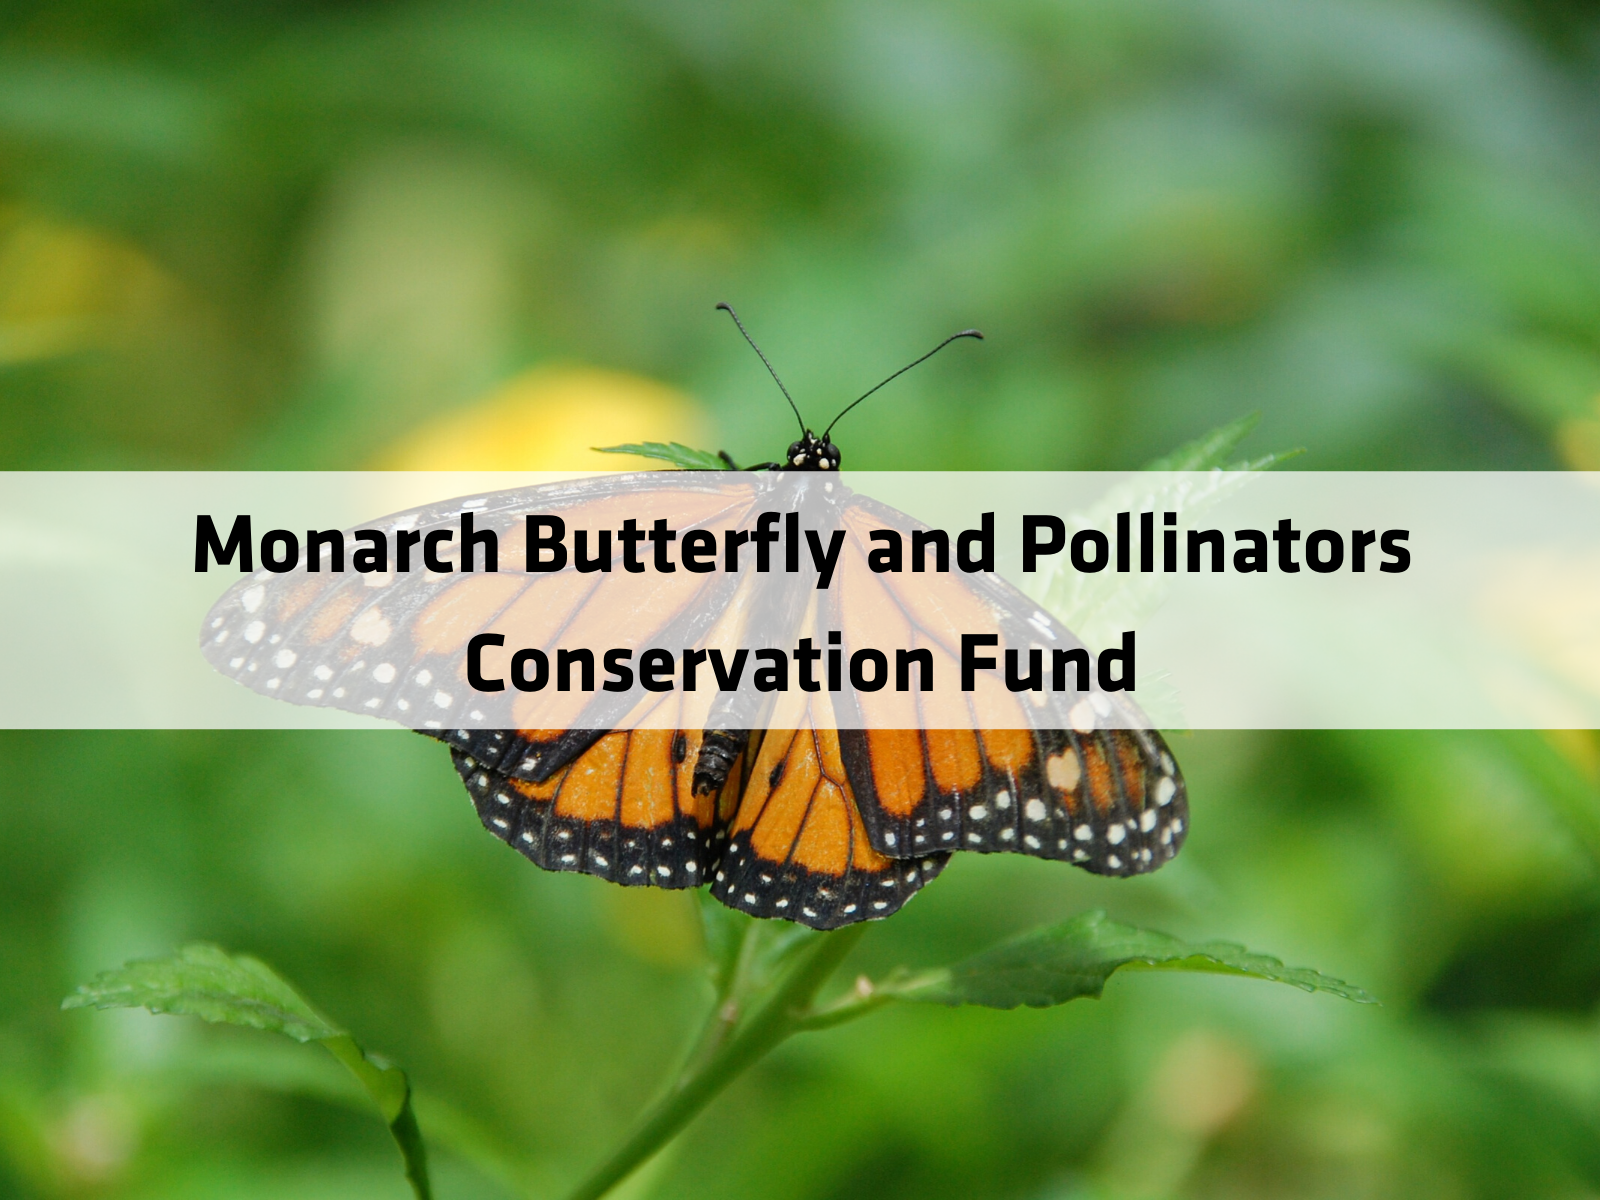 Monarch Butterfly and Pollinators Conservation Fund